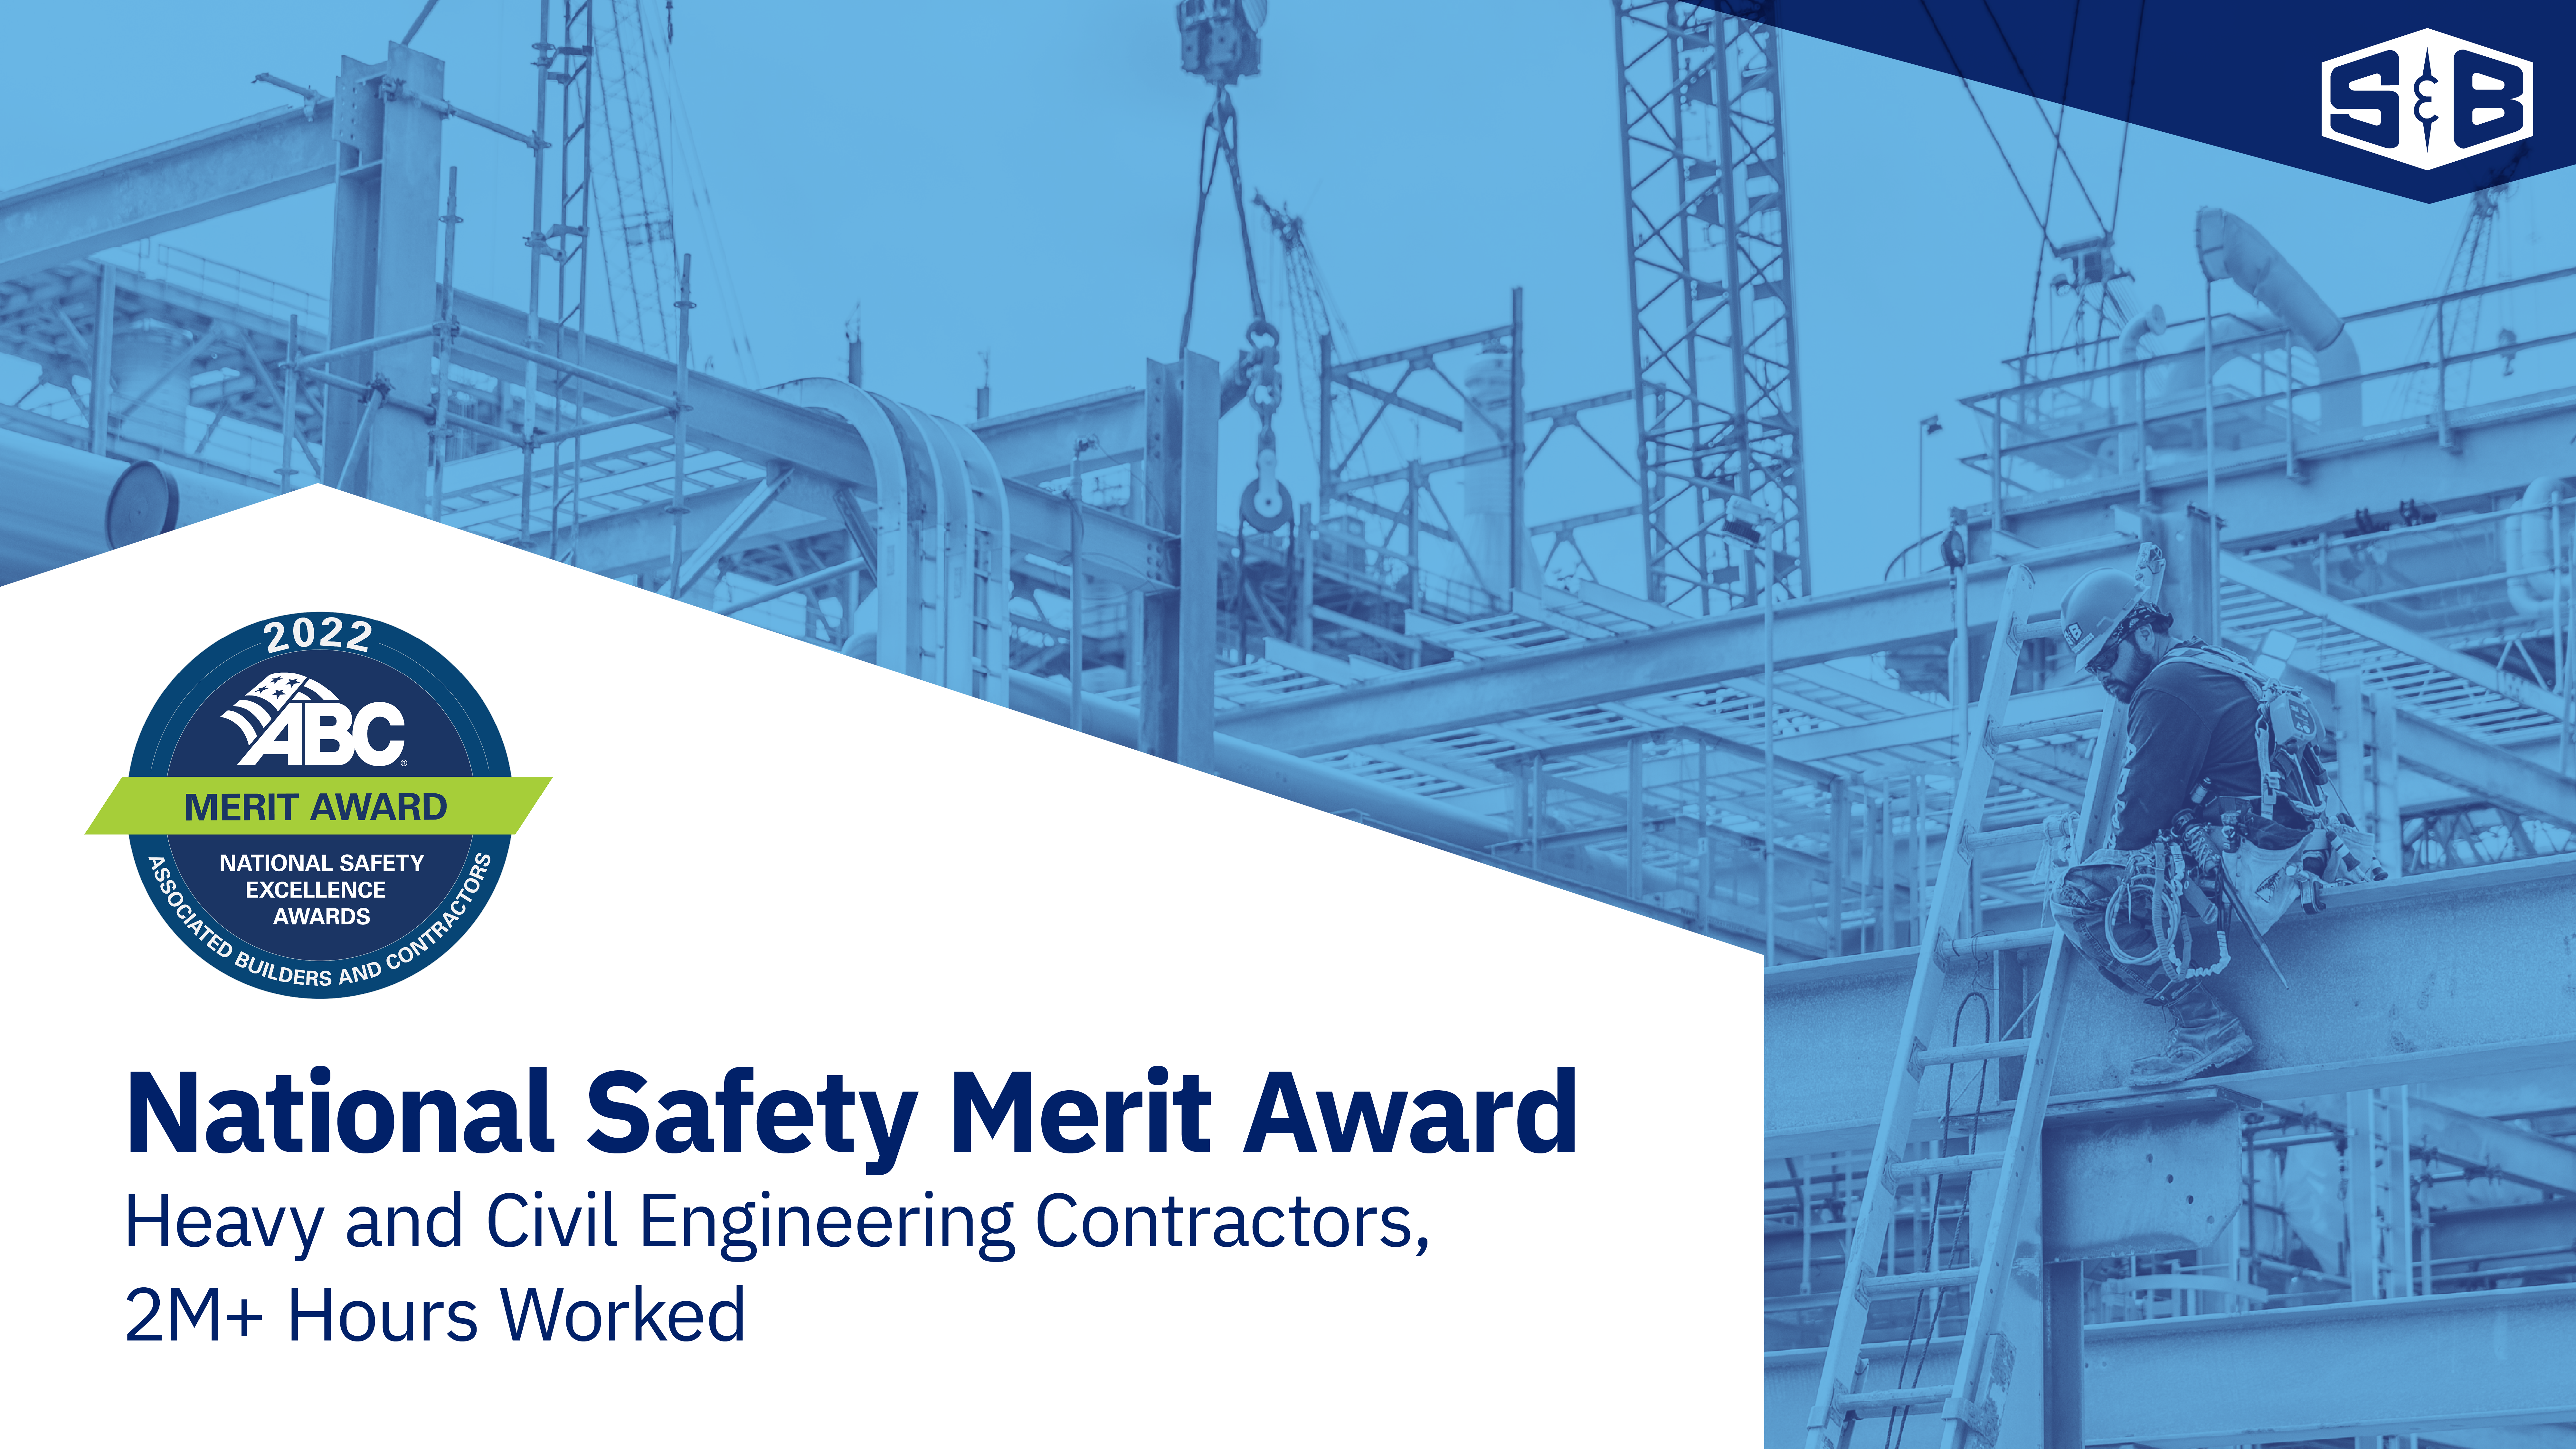 Image: National Safety Merit Award Heavy and Civil Engineering Contractors